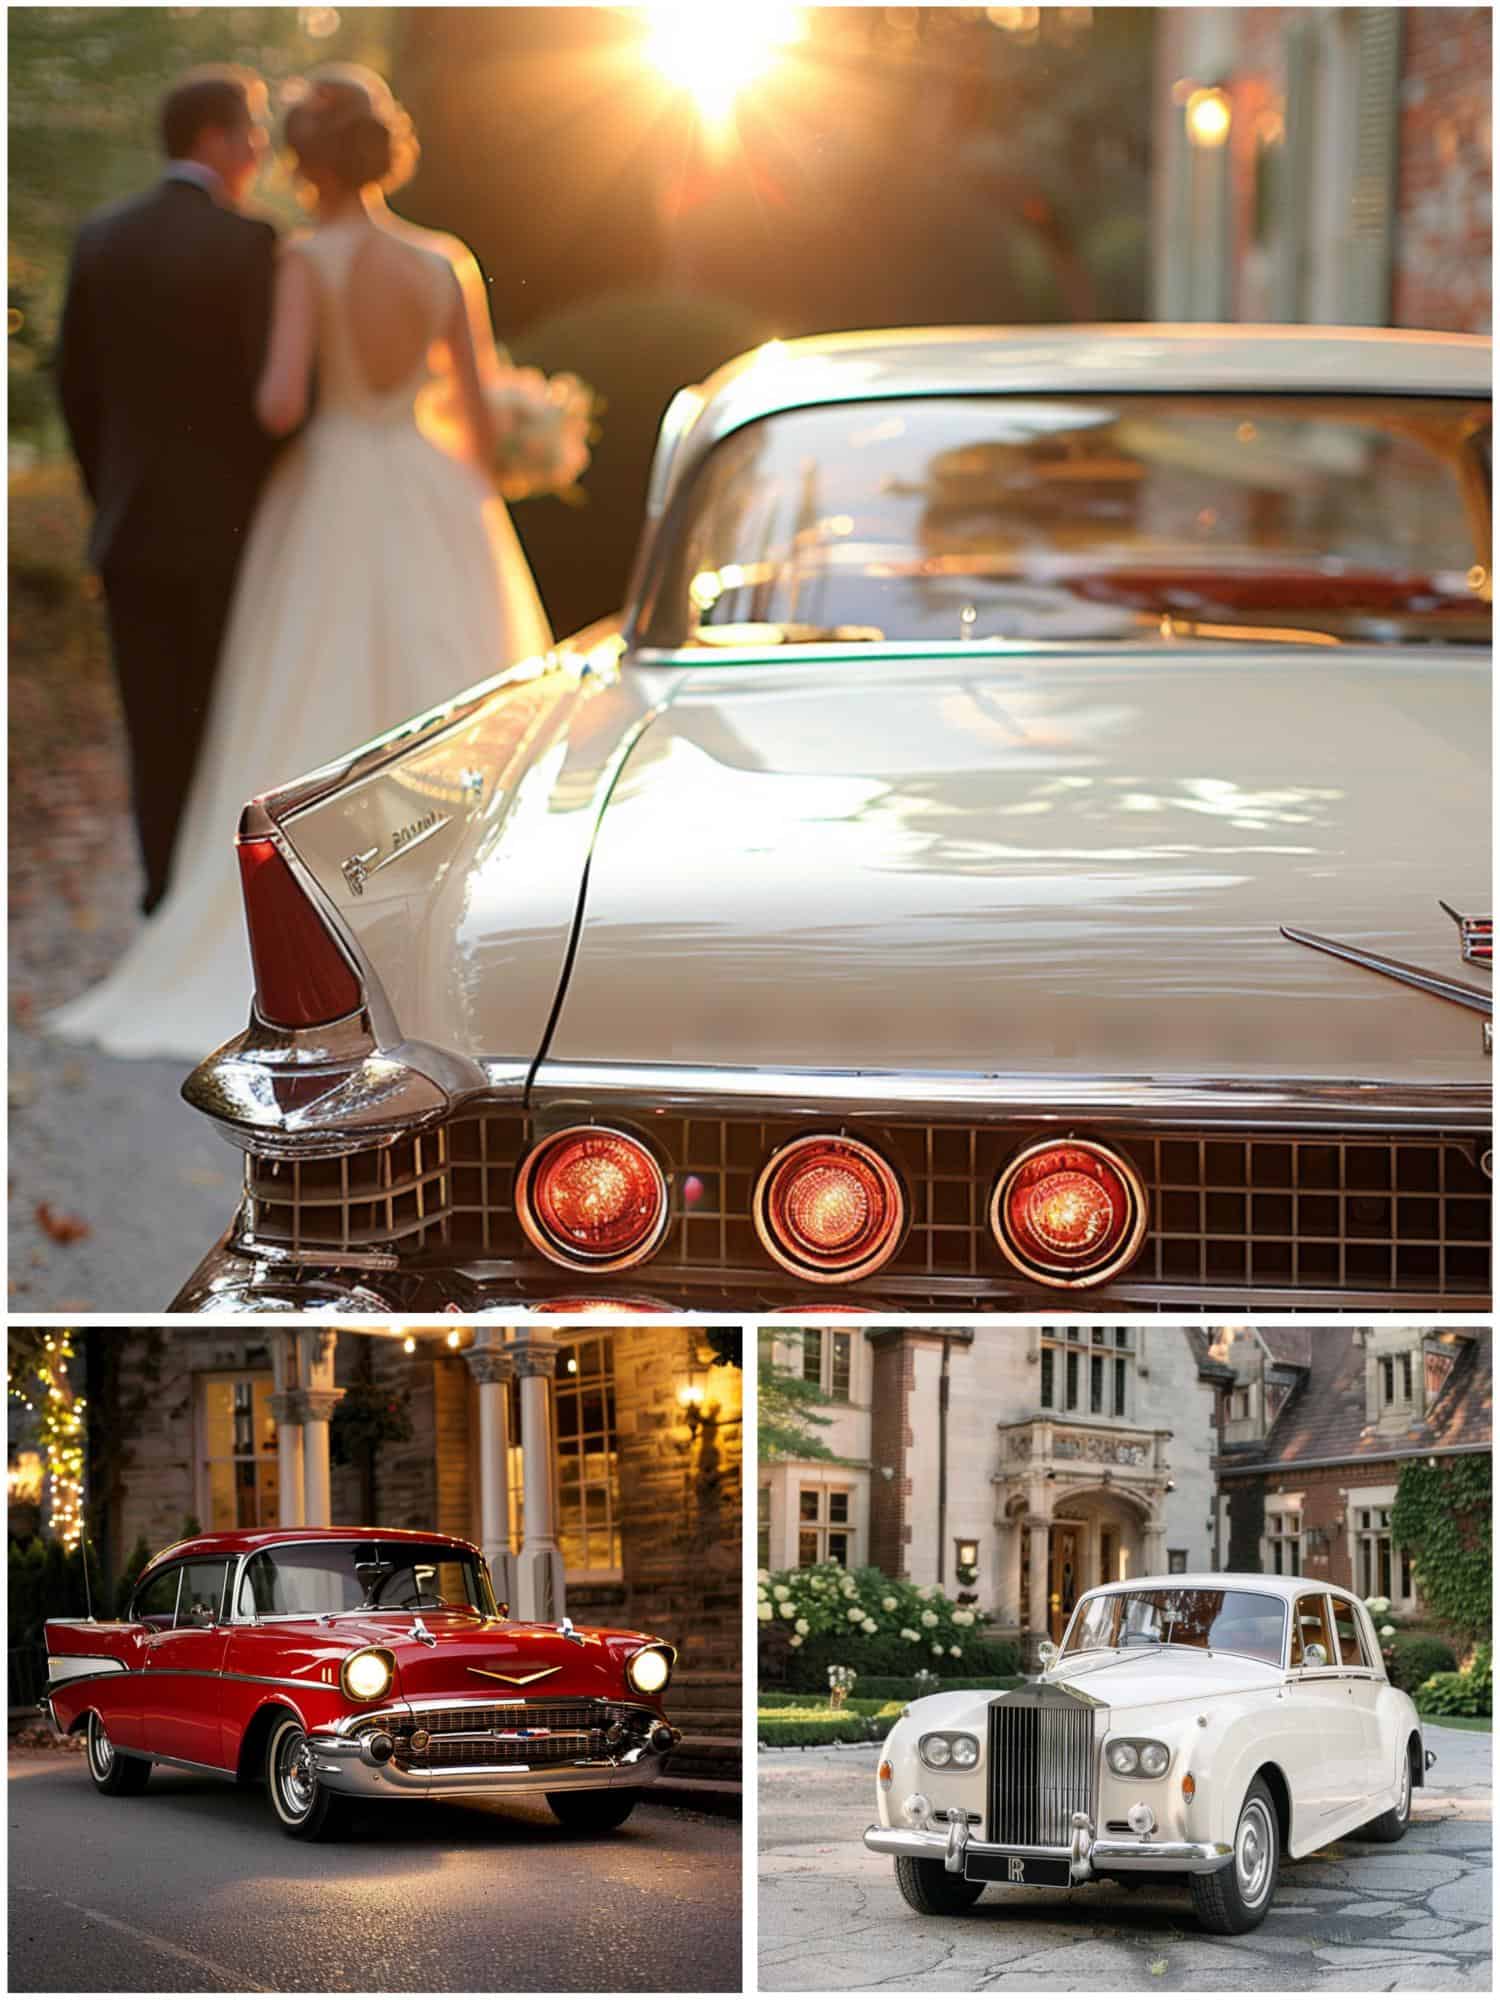 50s wedding theme ideas for incorporating cars